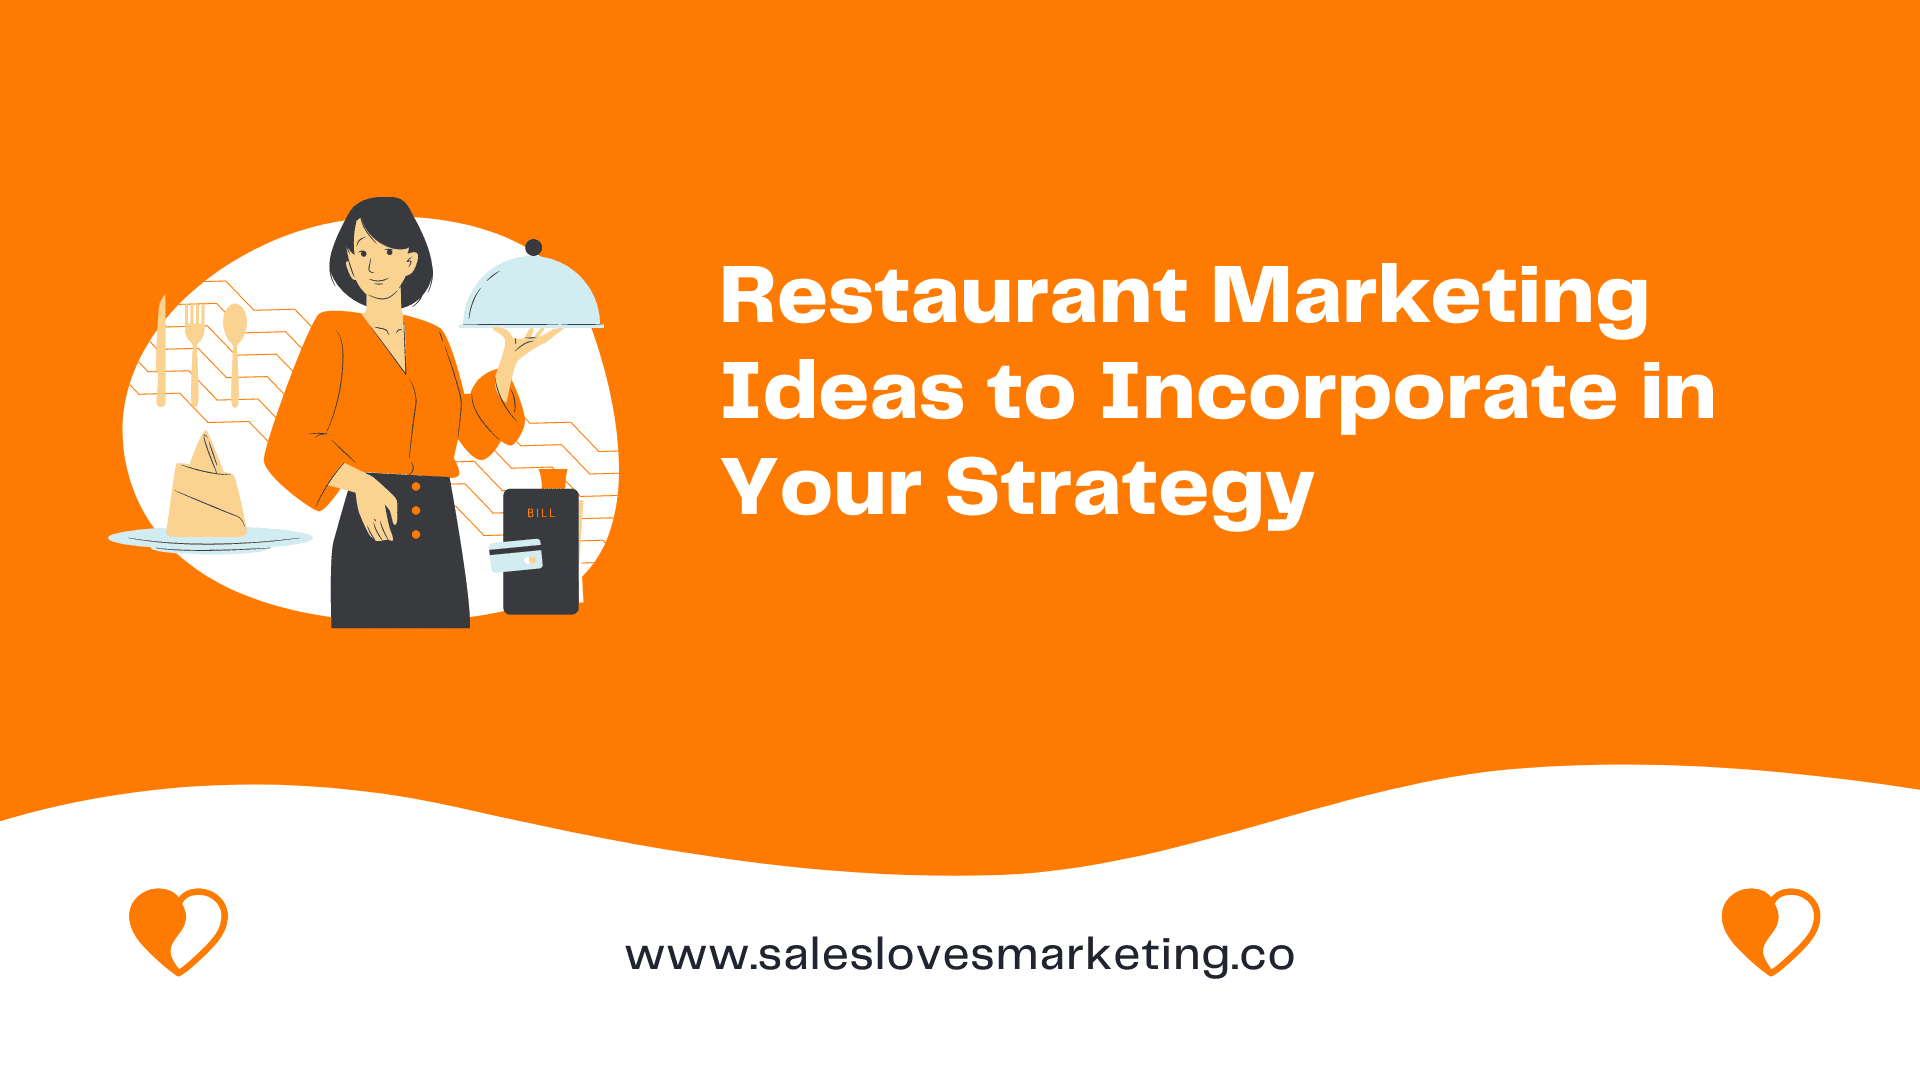 Restaurant Marketing Ideas to Incorporate in Your 2022 Strategy